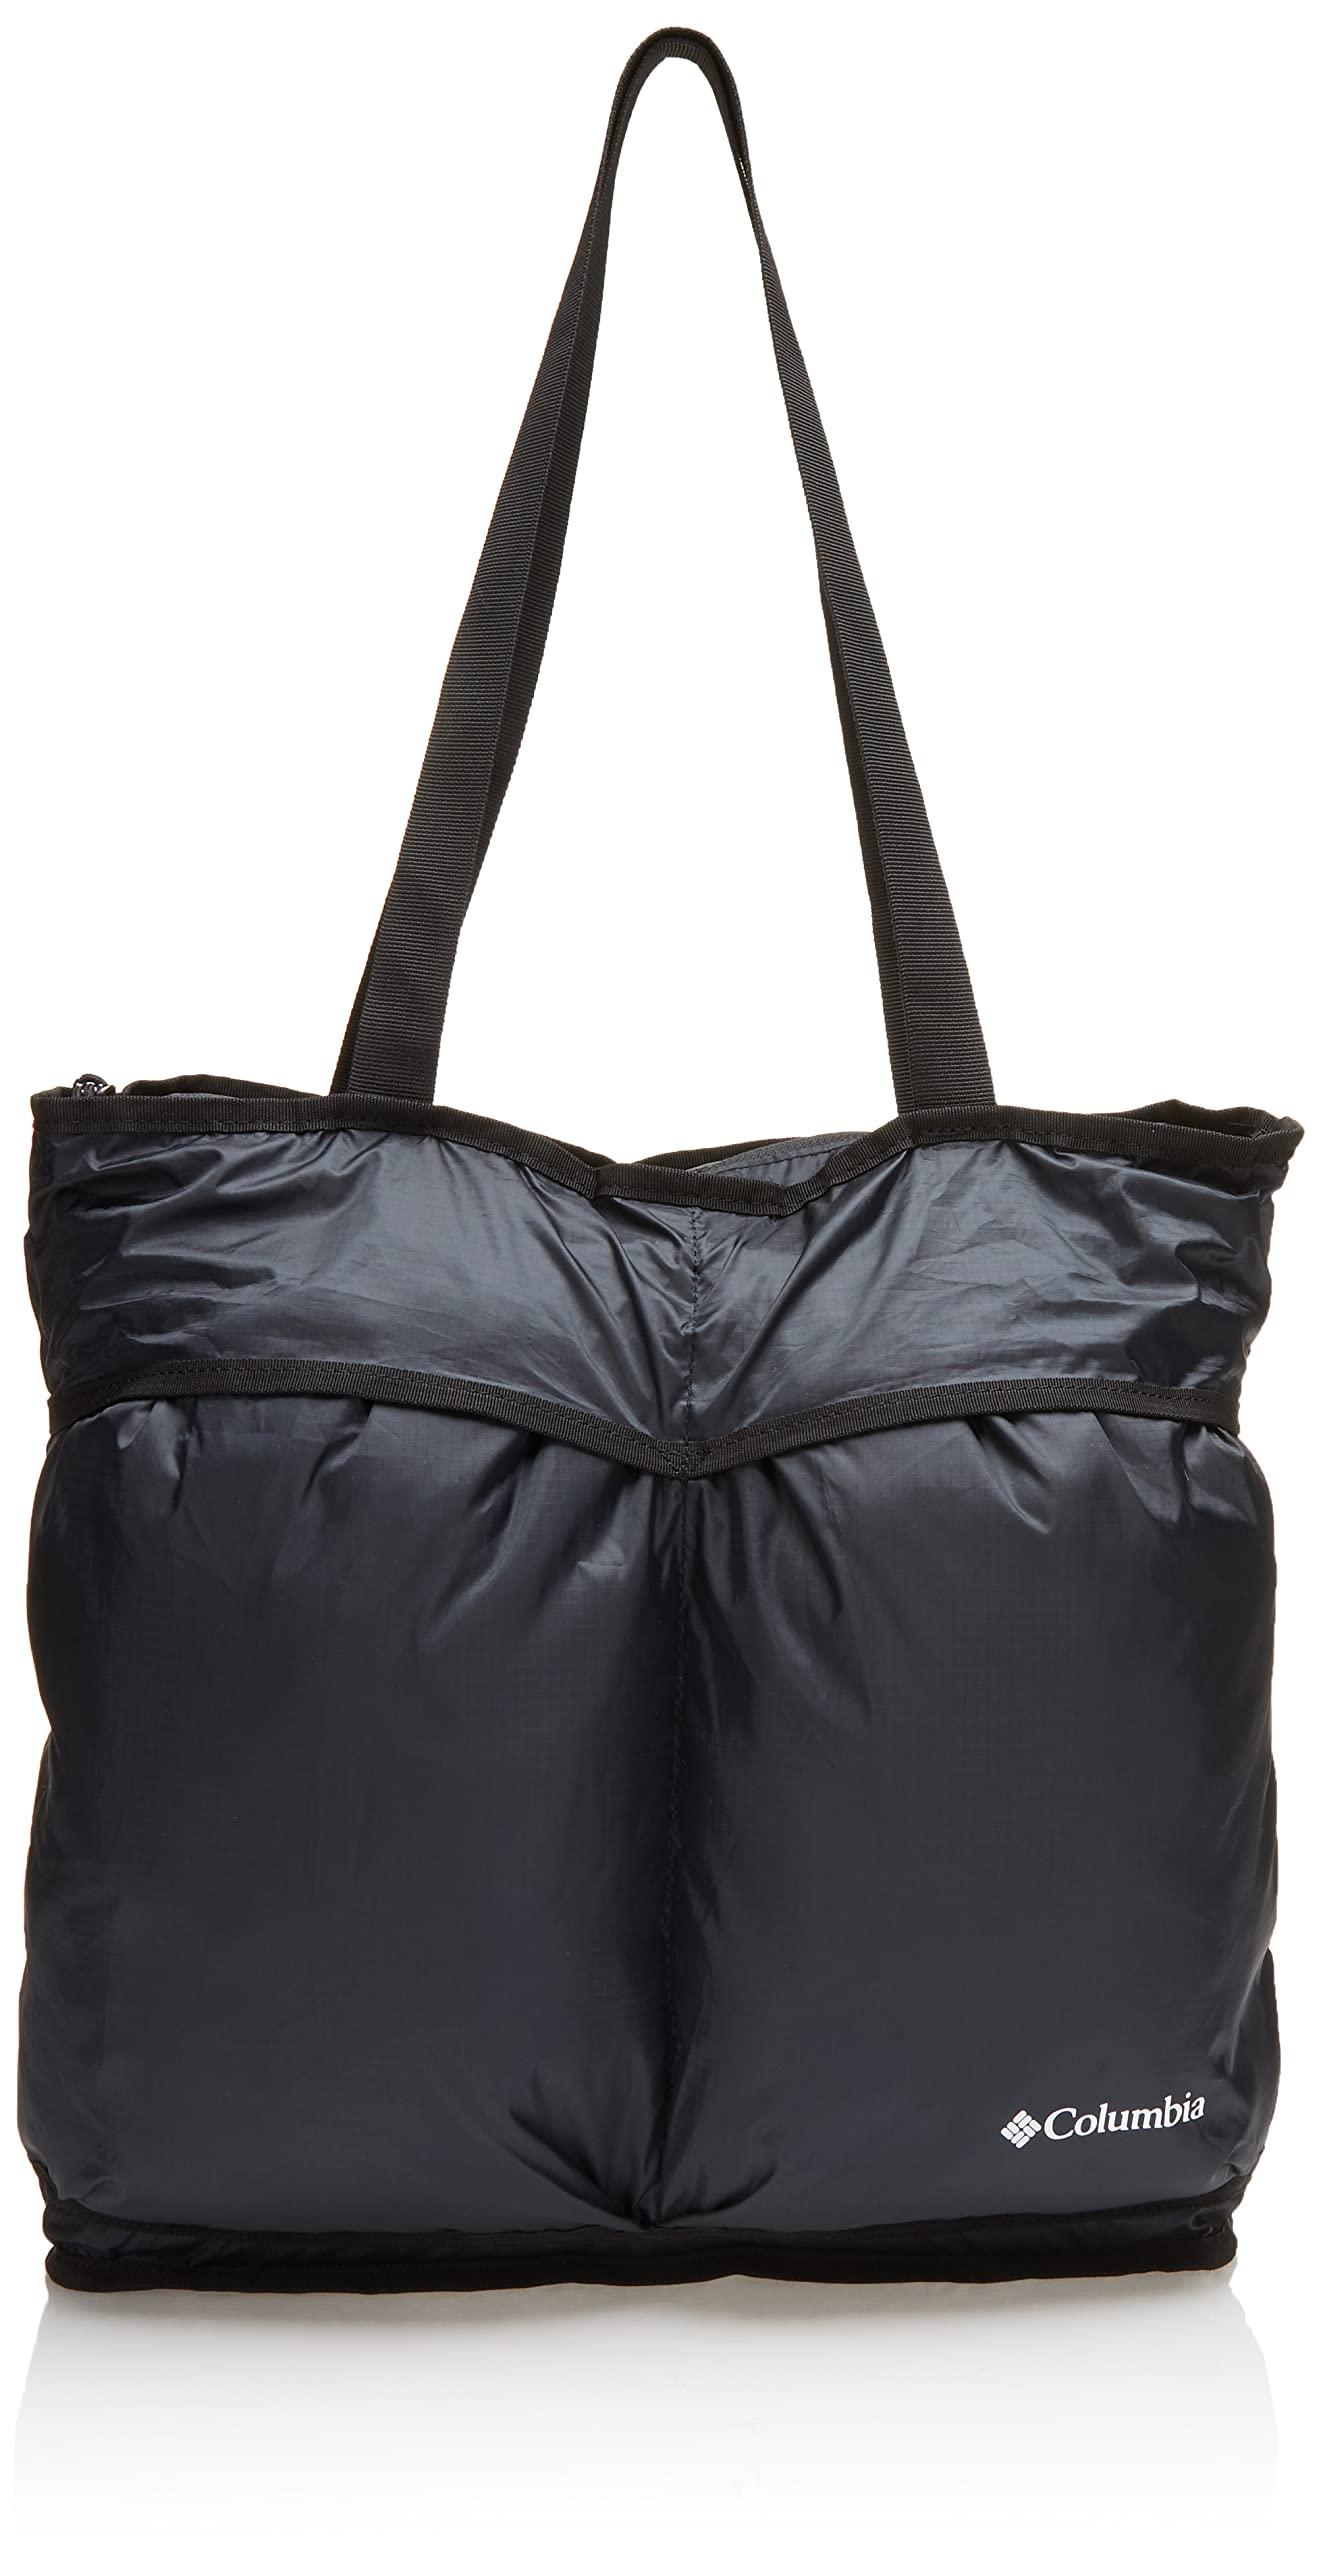 Columbia Lightweight Ii 18l Packable Tote Bag One Size in Black | Lyst UK